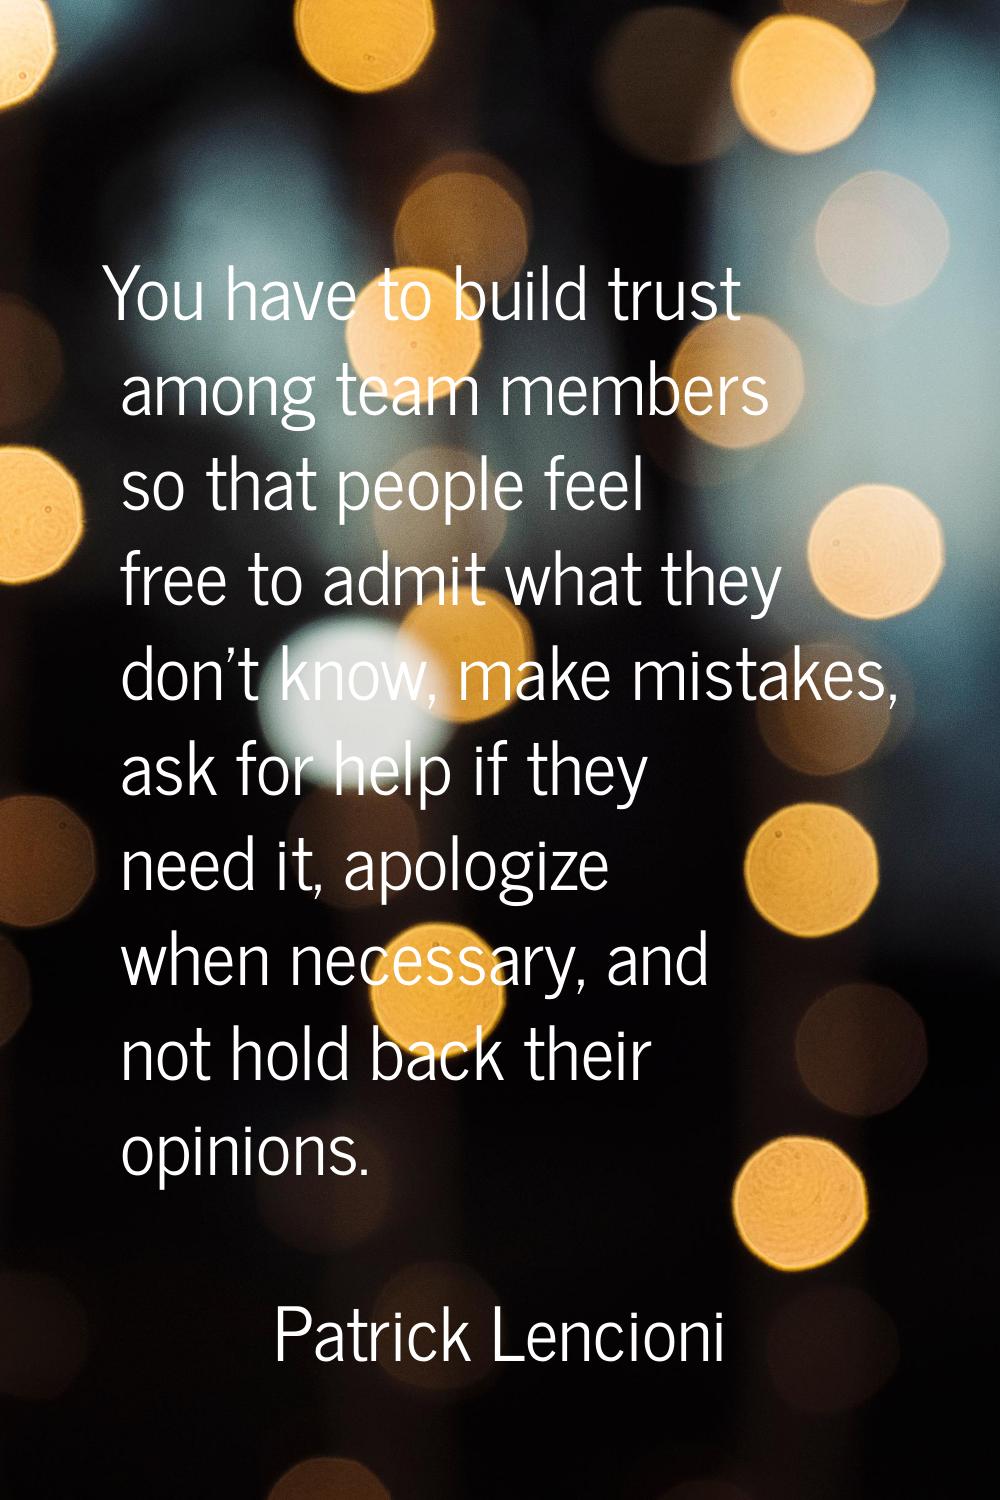 You have to build trust among team members so that people feel free to admit what they don't know, 